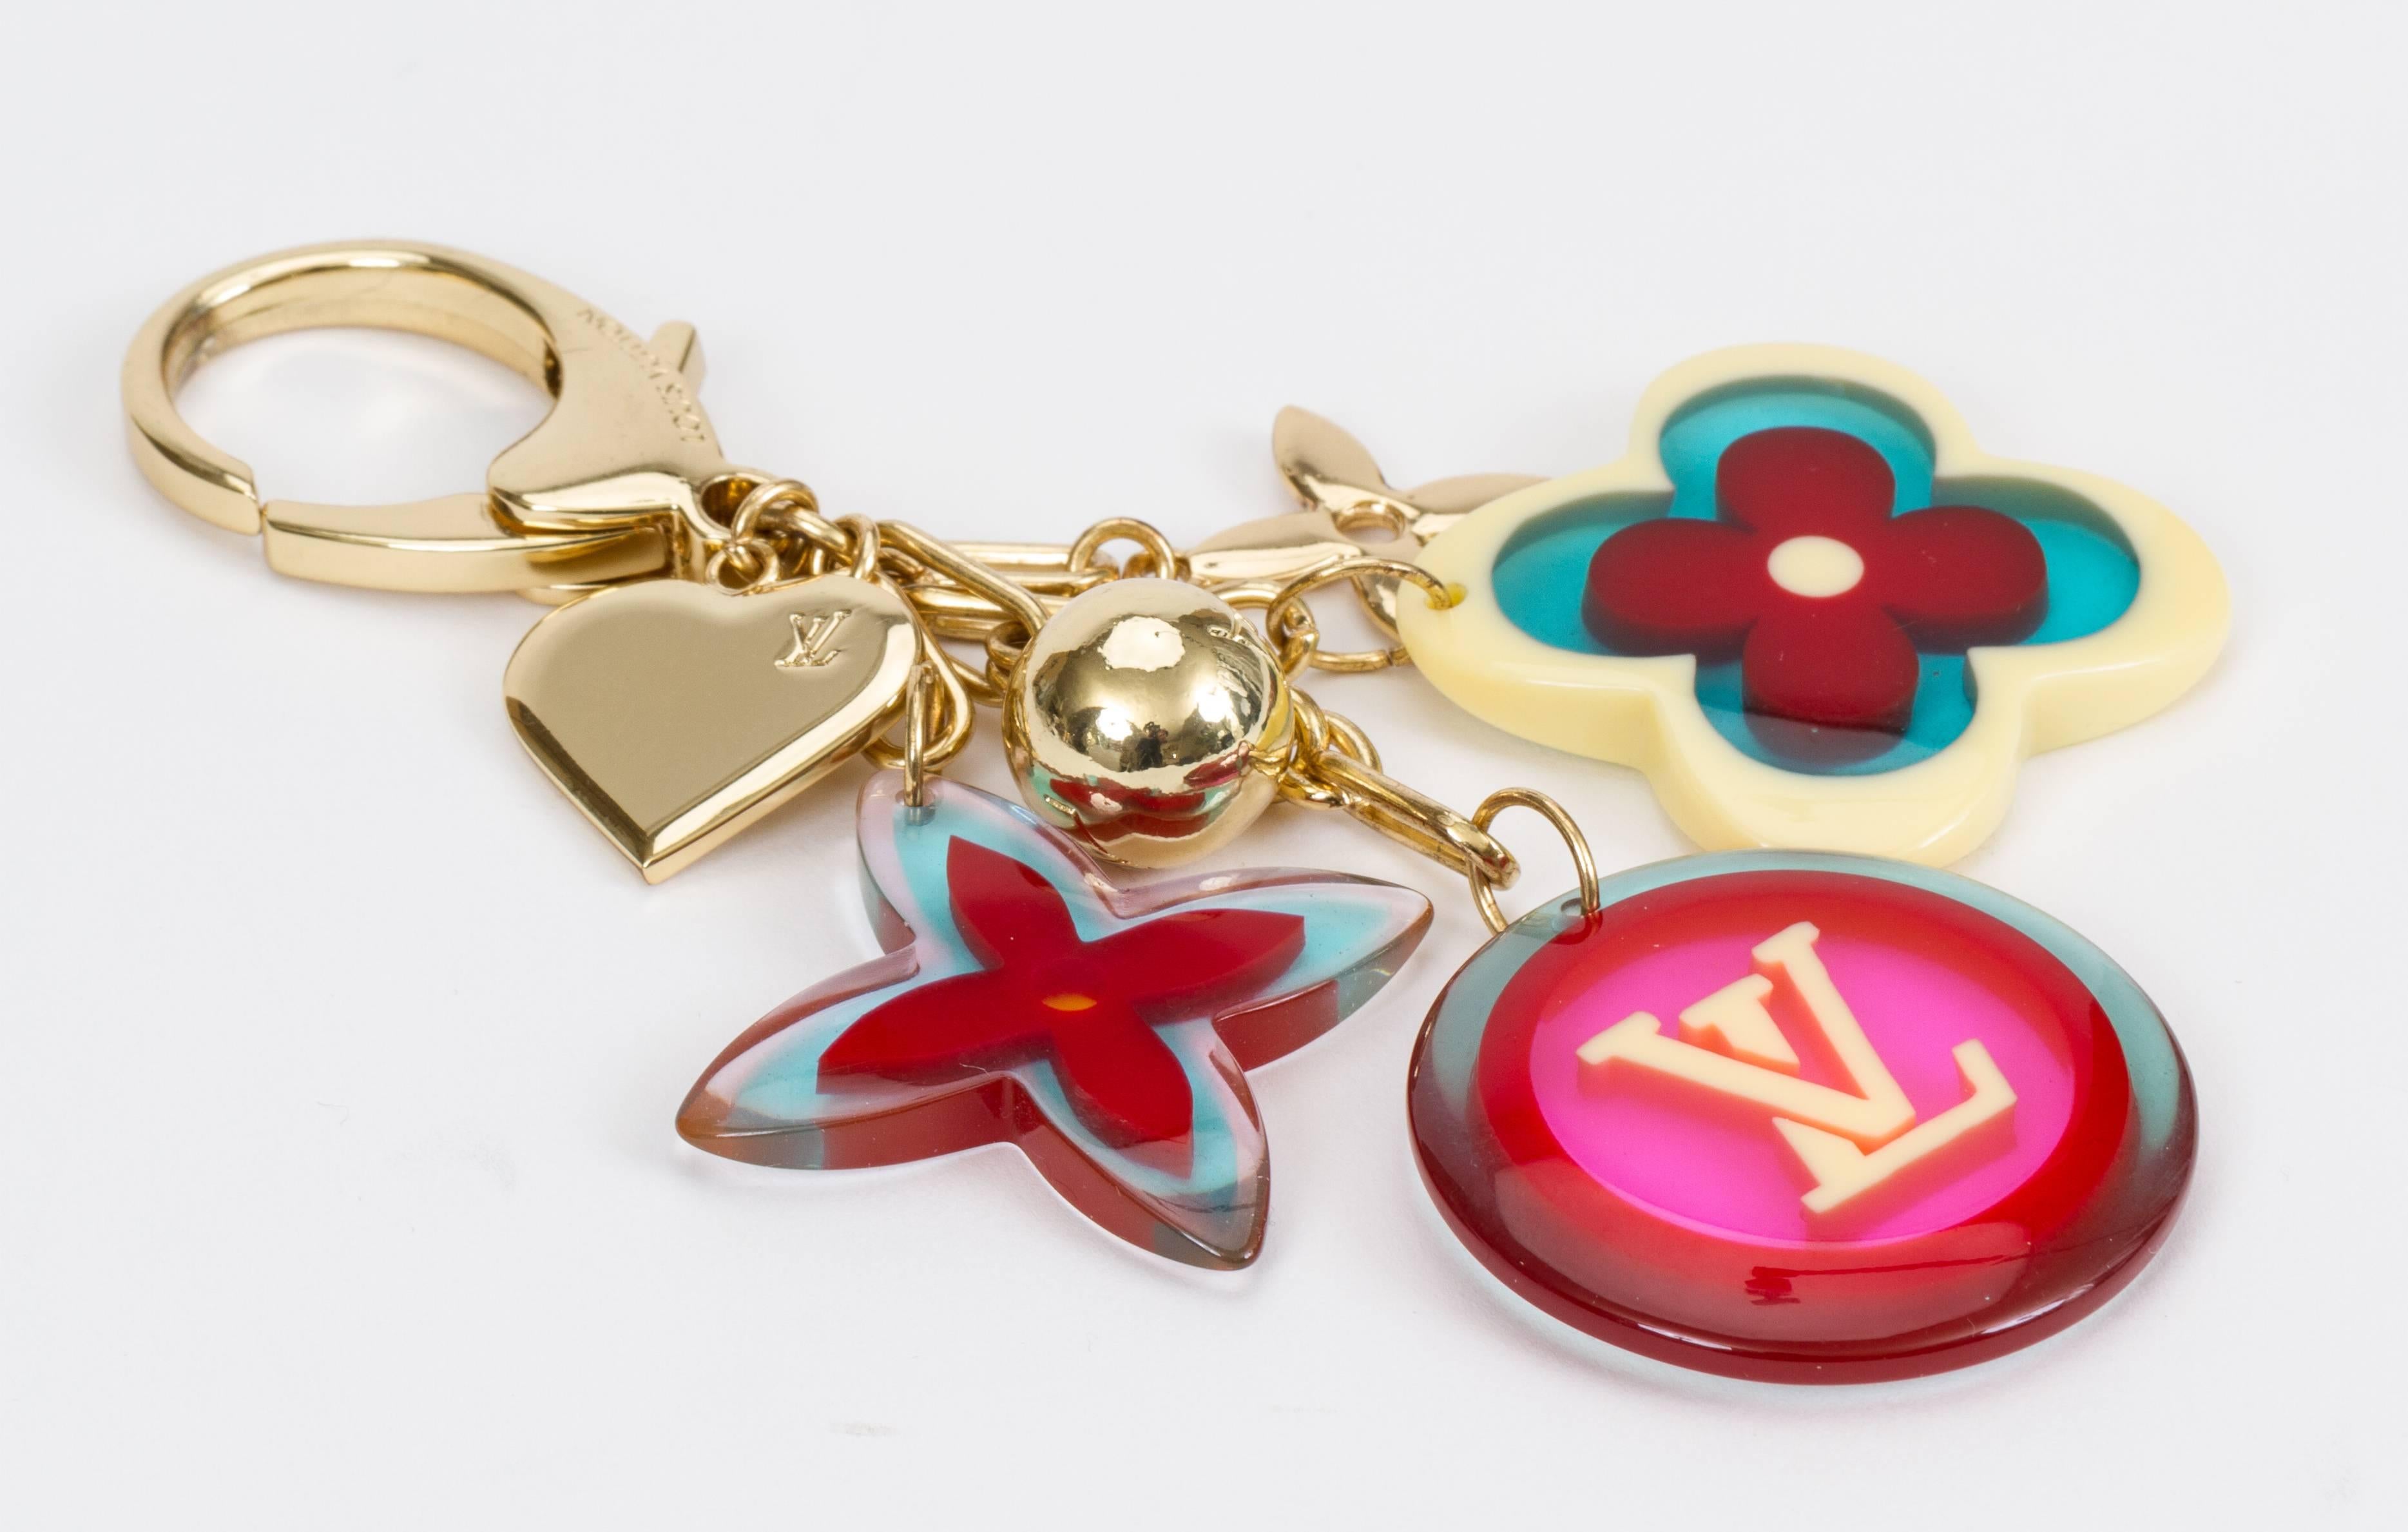 Louis Vuitton authentic bag charm /keychain with multicolor monogram symbols in lucite and gold tone metal. Comes with velvet pouch.
